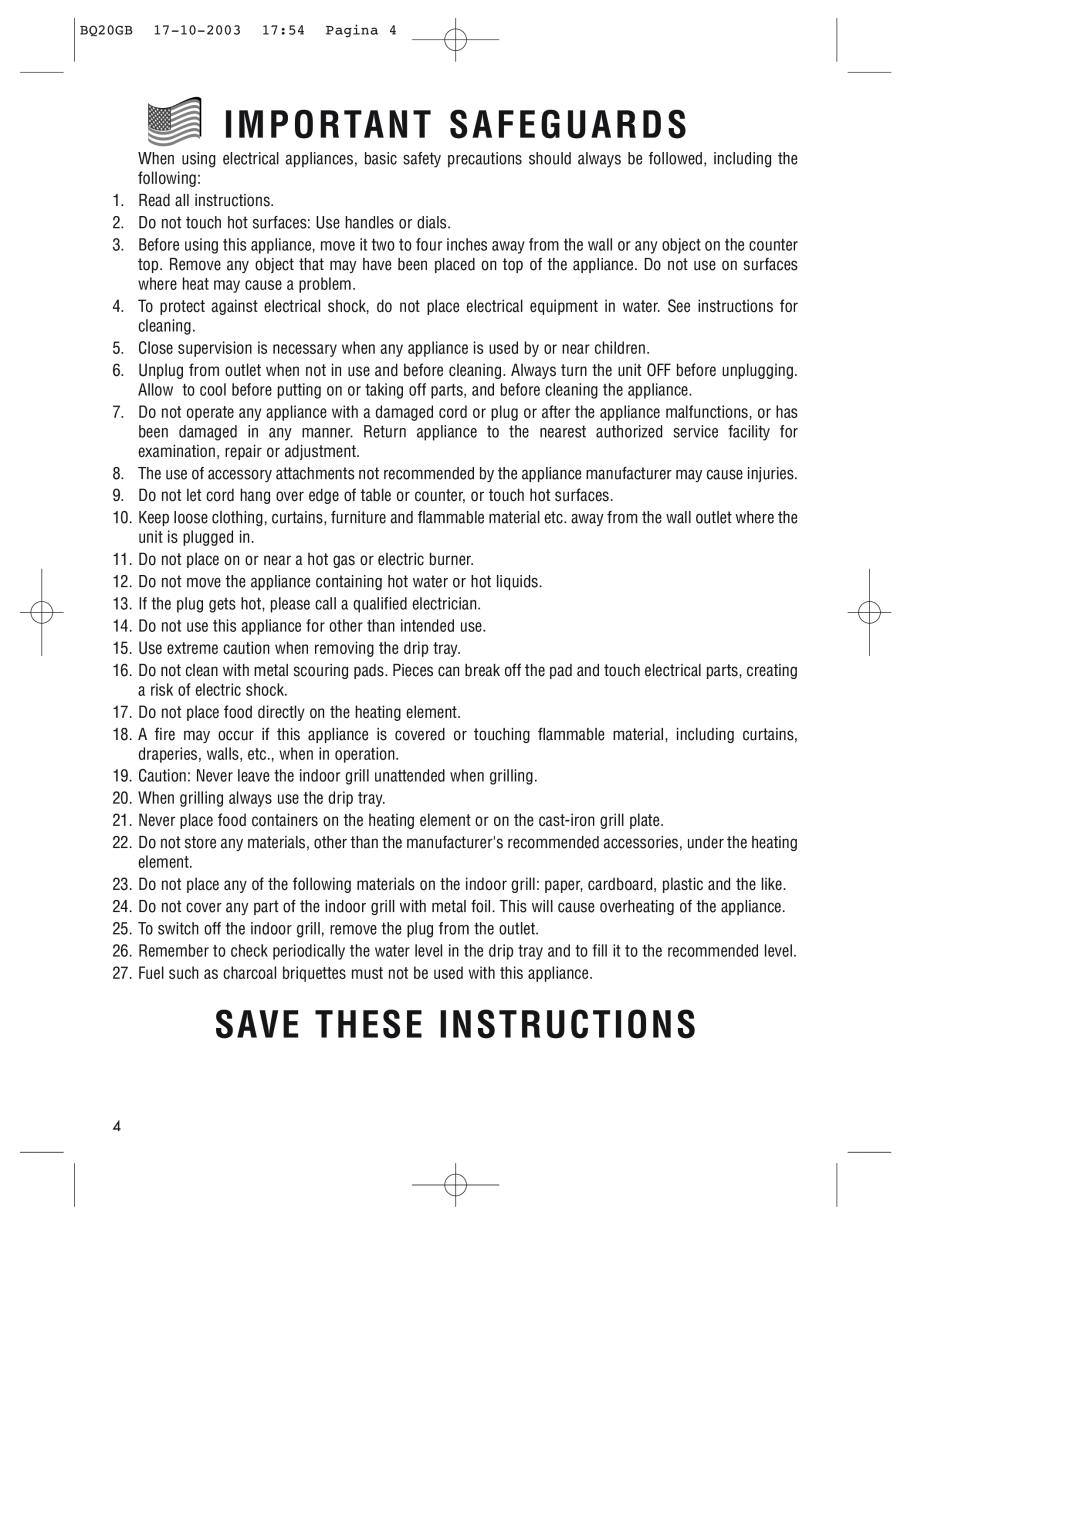 DeLonghi BQ20 manual Important Safeguards, Save These Instructions 